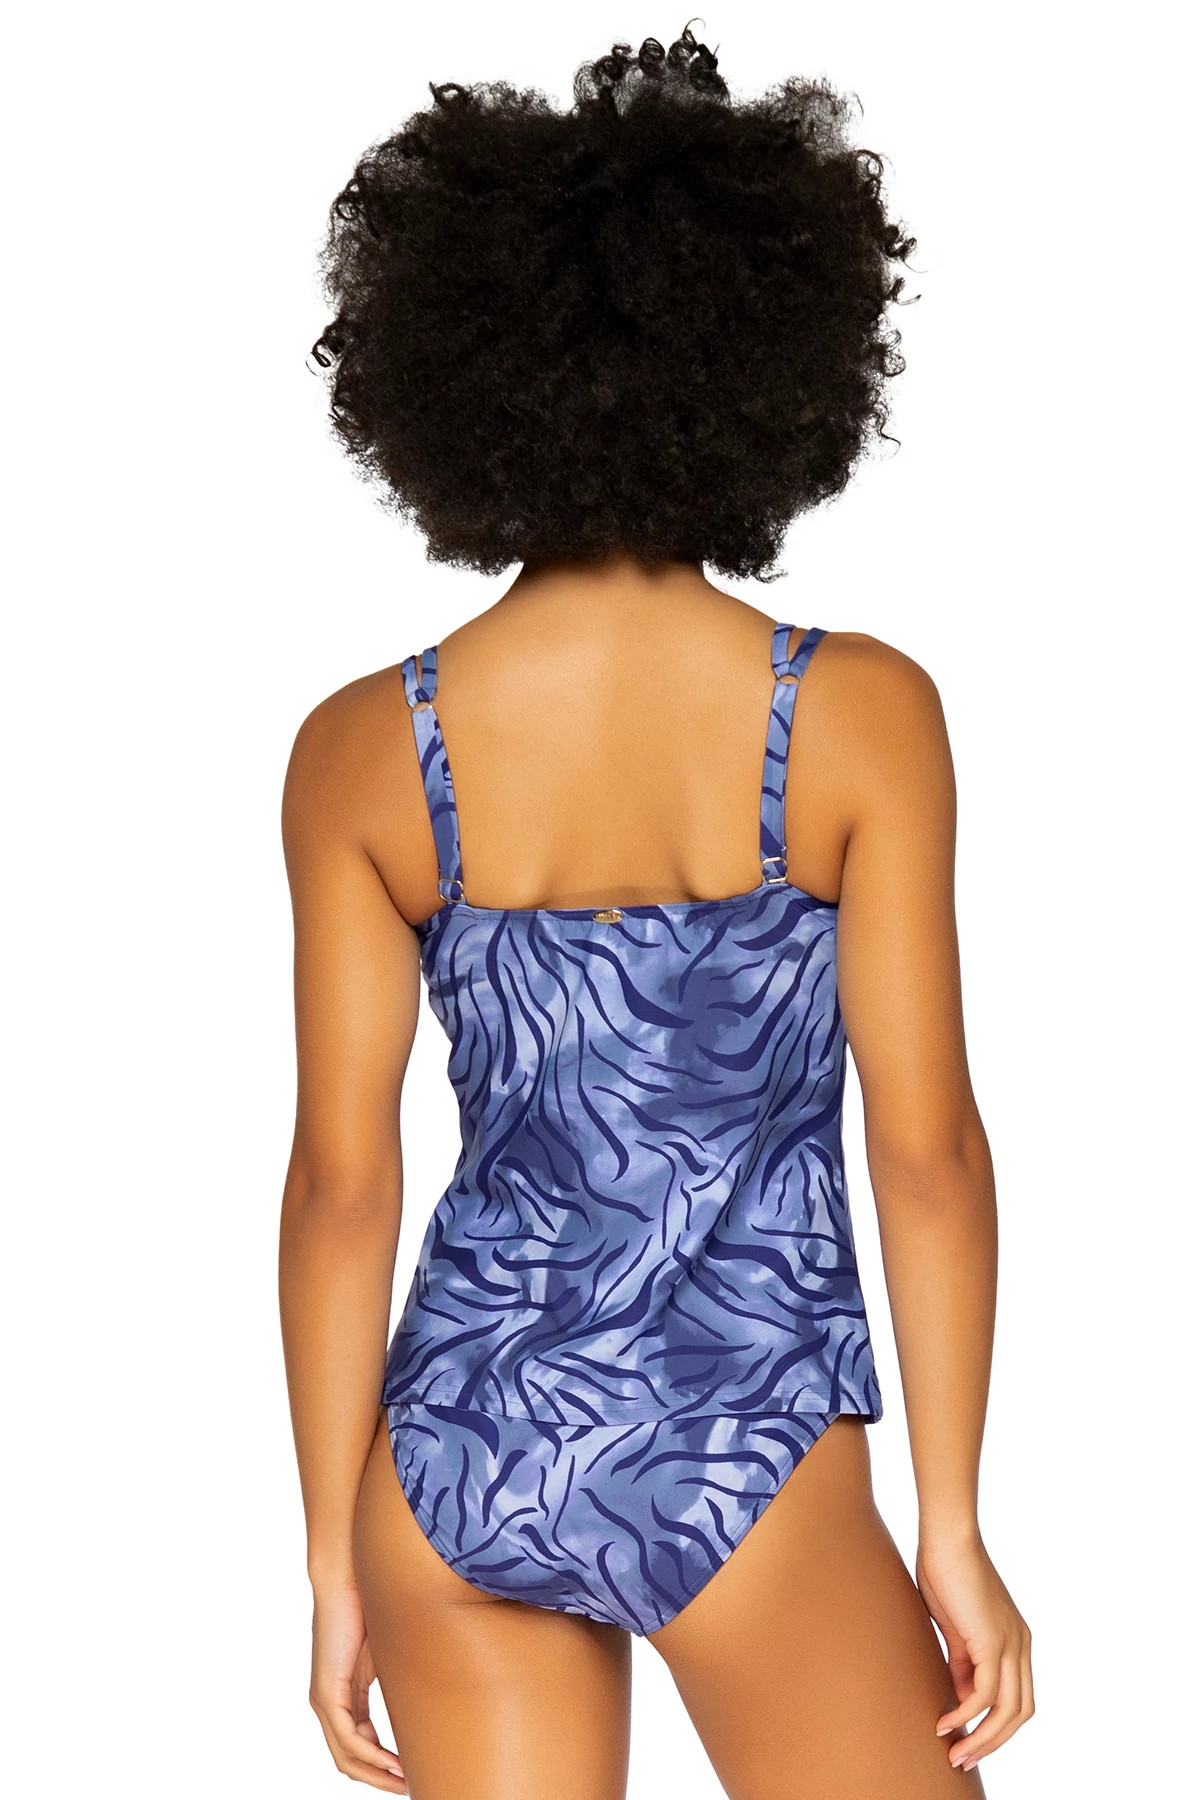 SUMATRA Taylor Over The Shoulder Tankini Top (D+ Cup) image number 2